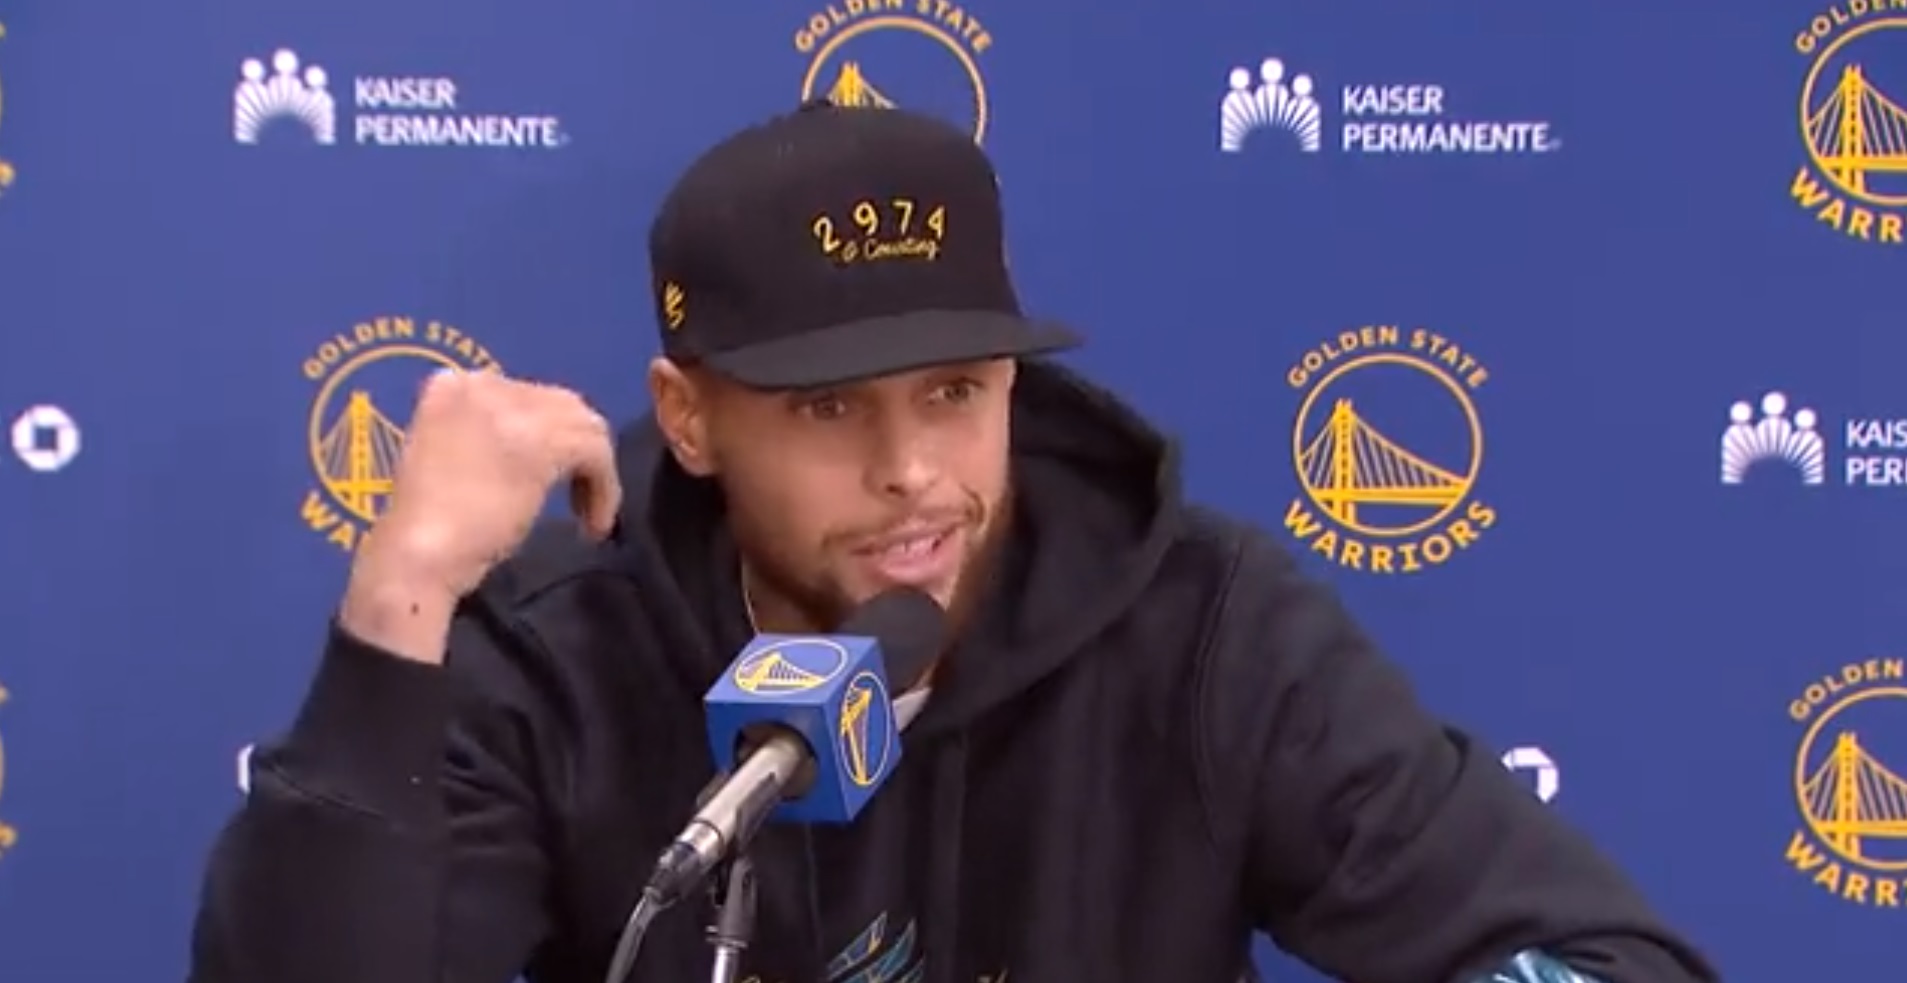 PHOTO Steph Curry Wearing 2974 Hat After Breaking 3 Point Record